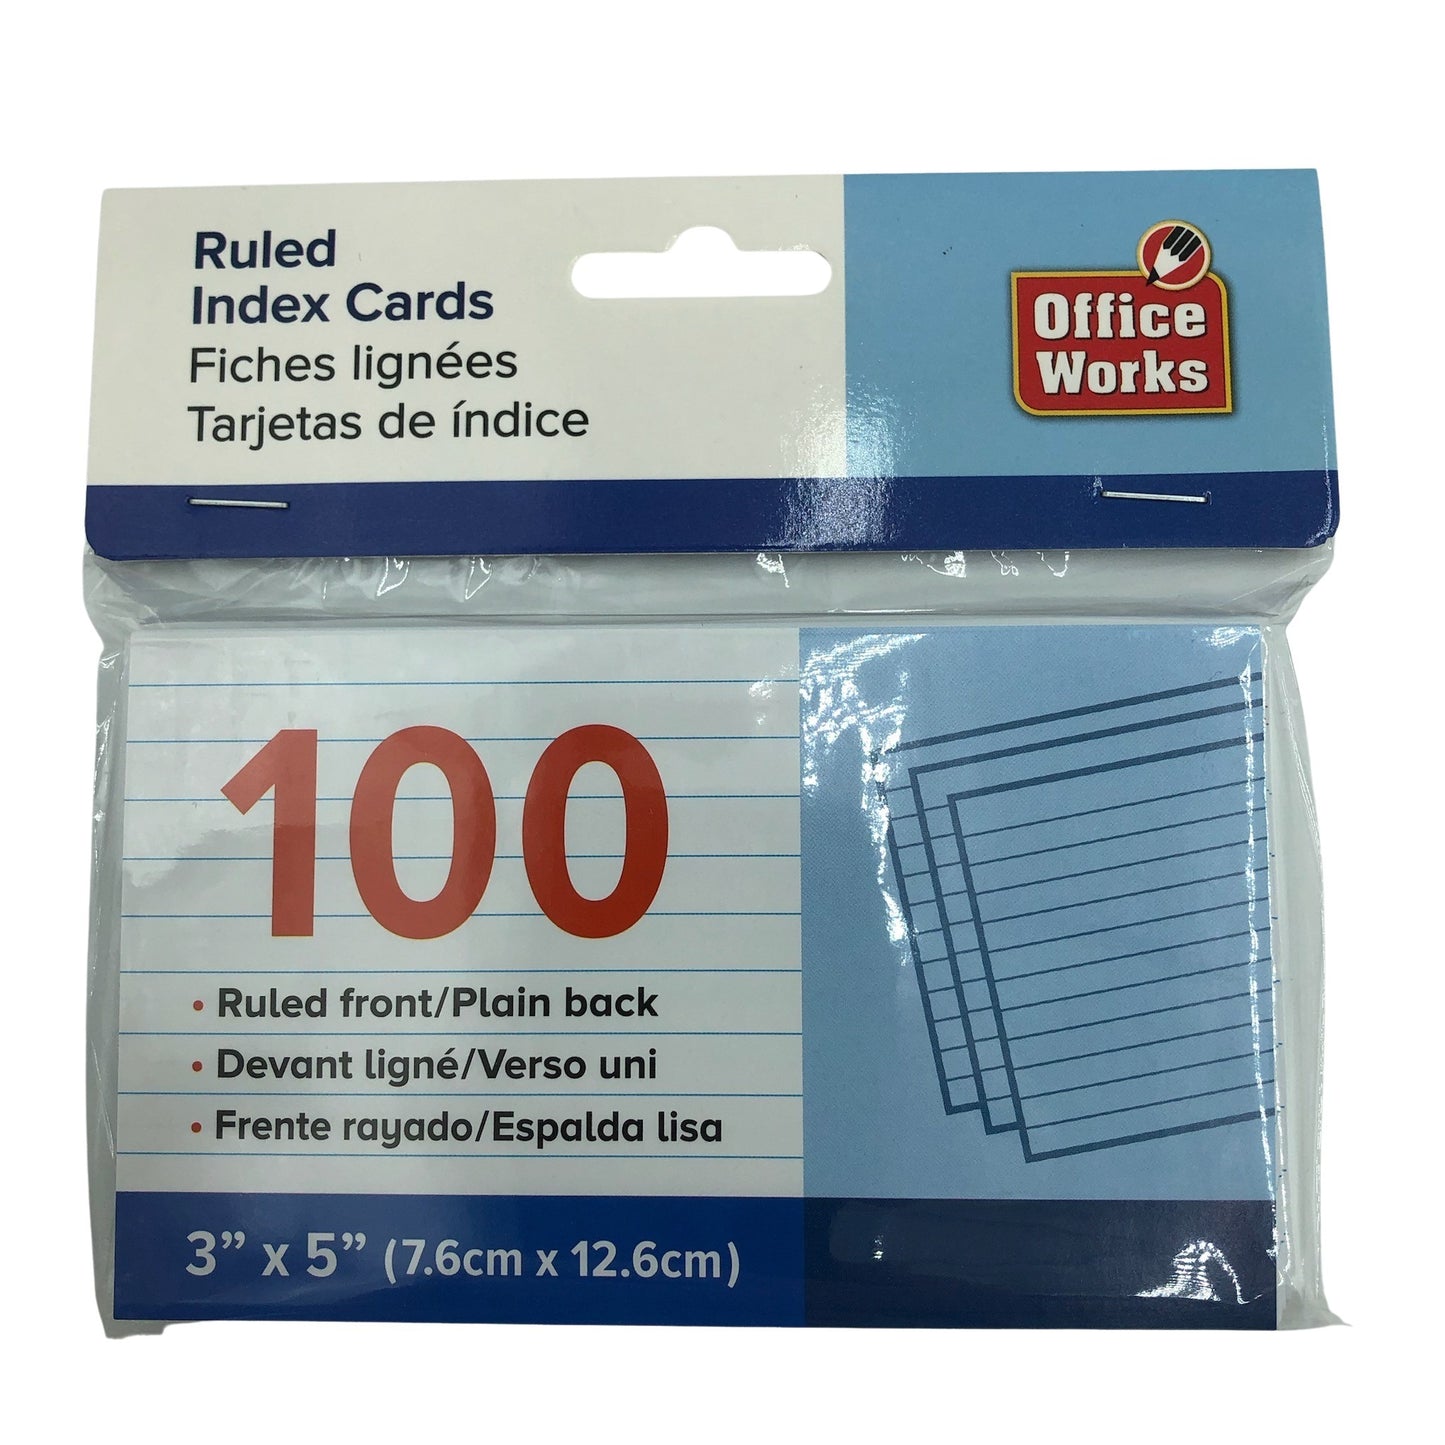 3"x5" Index Cards 100's  Ruled 30397 Office Works